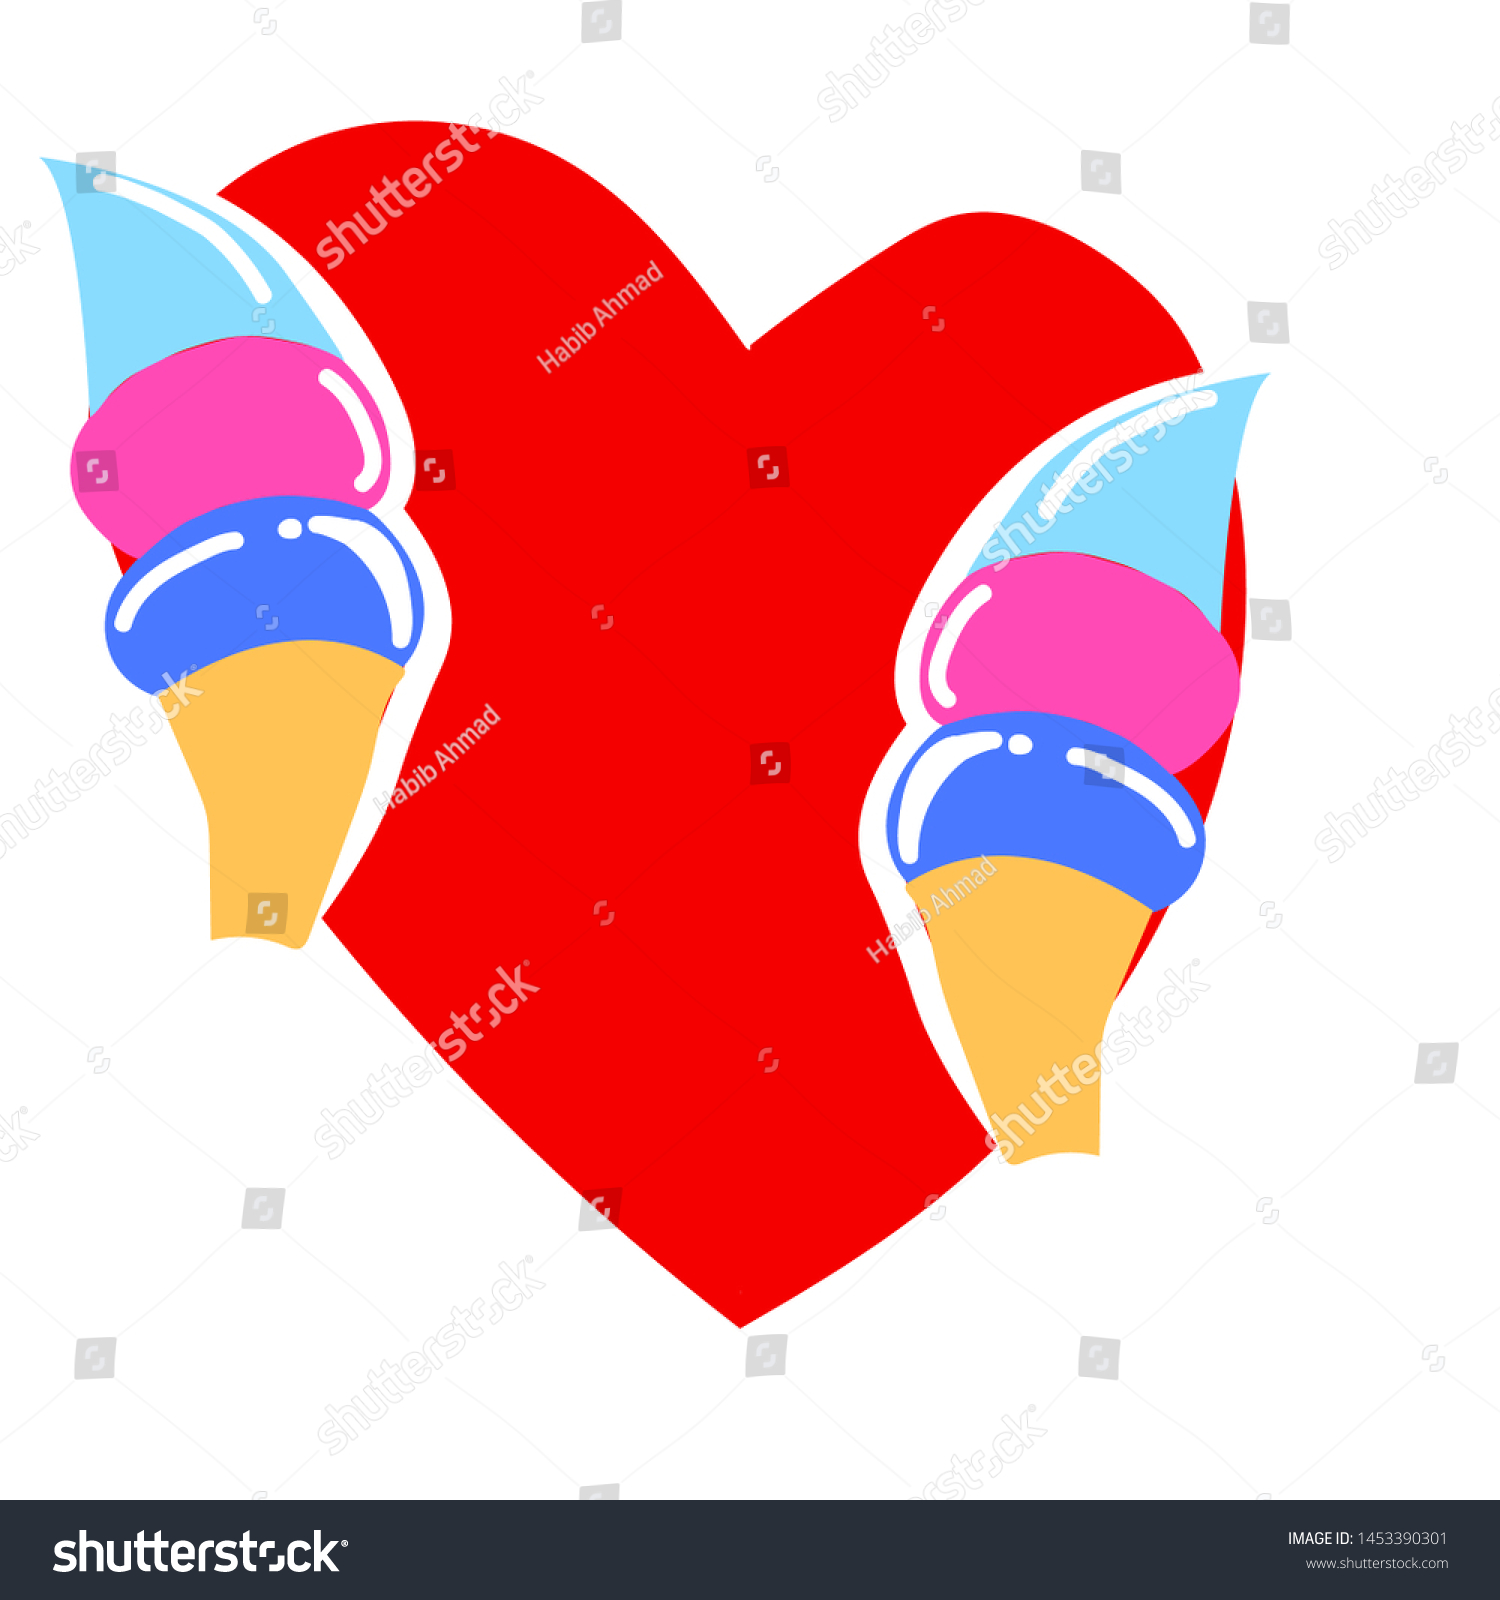 Illustration Ice Cream Love Middle Stock Vector Royalty Free 1453390301 4516